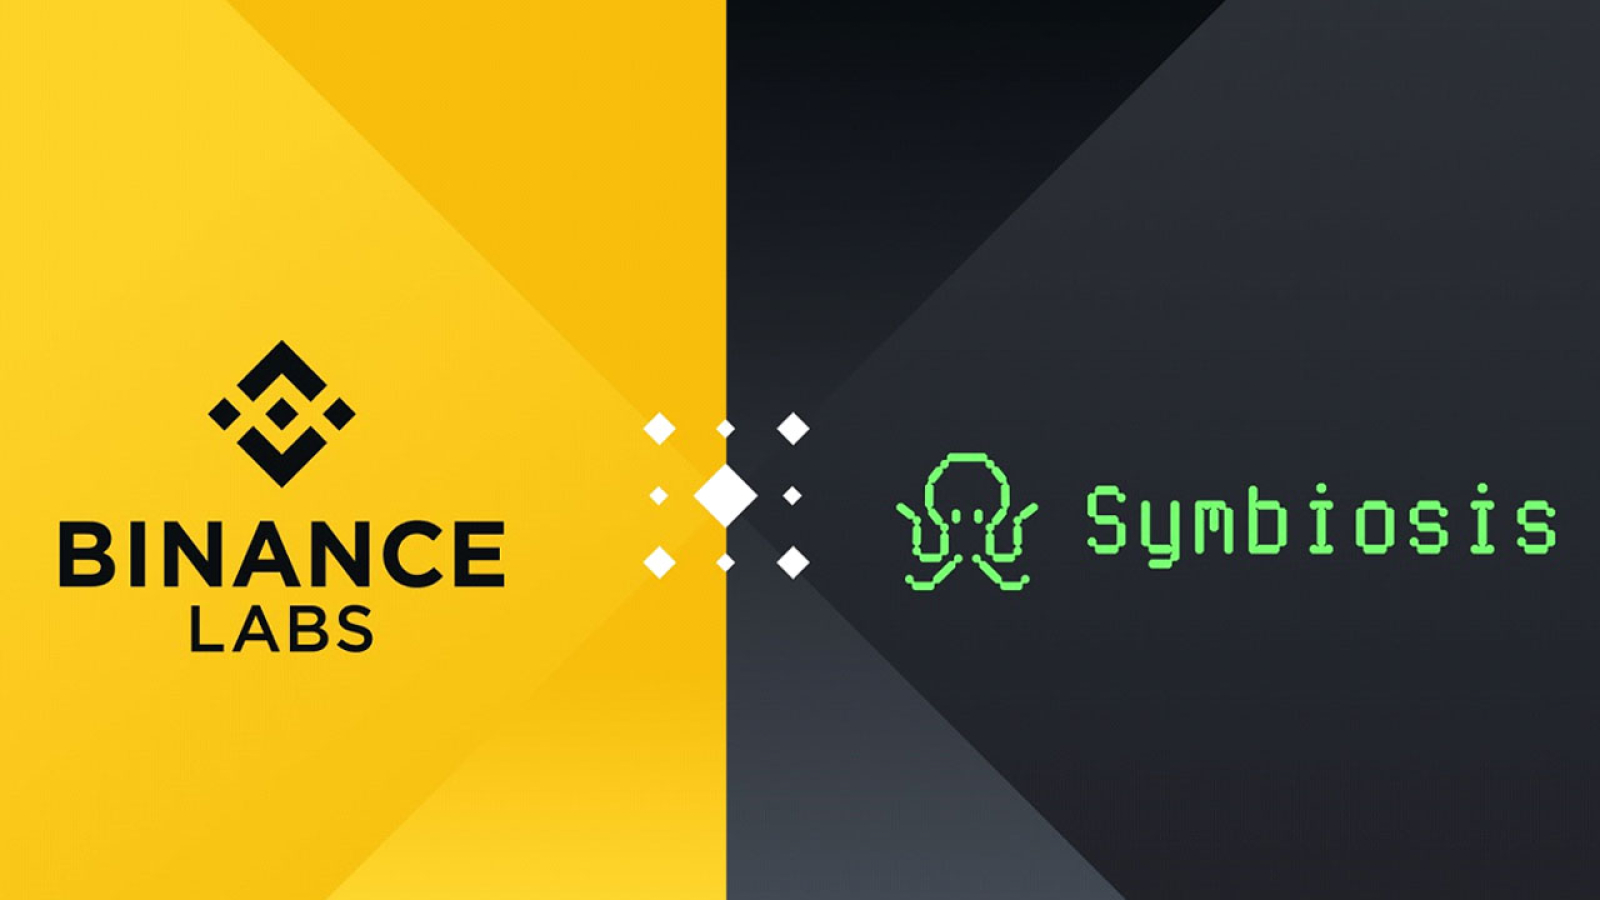 Binance Labs Makes Strategic Investment in Symbiosis Finance